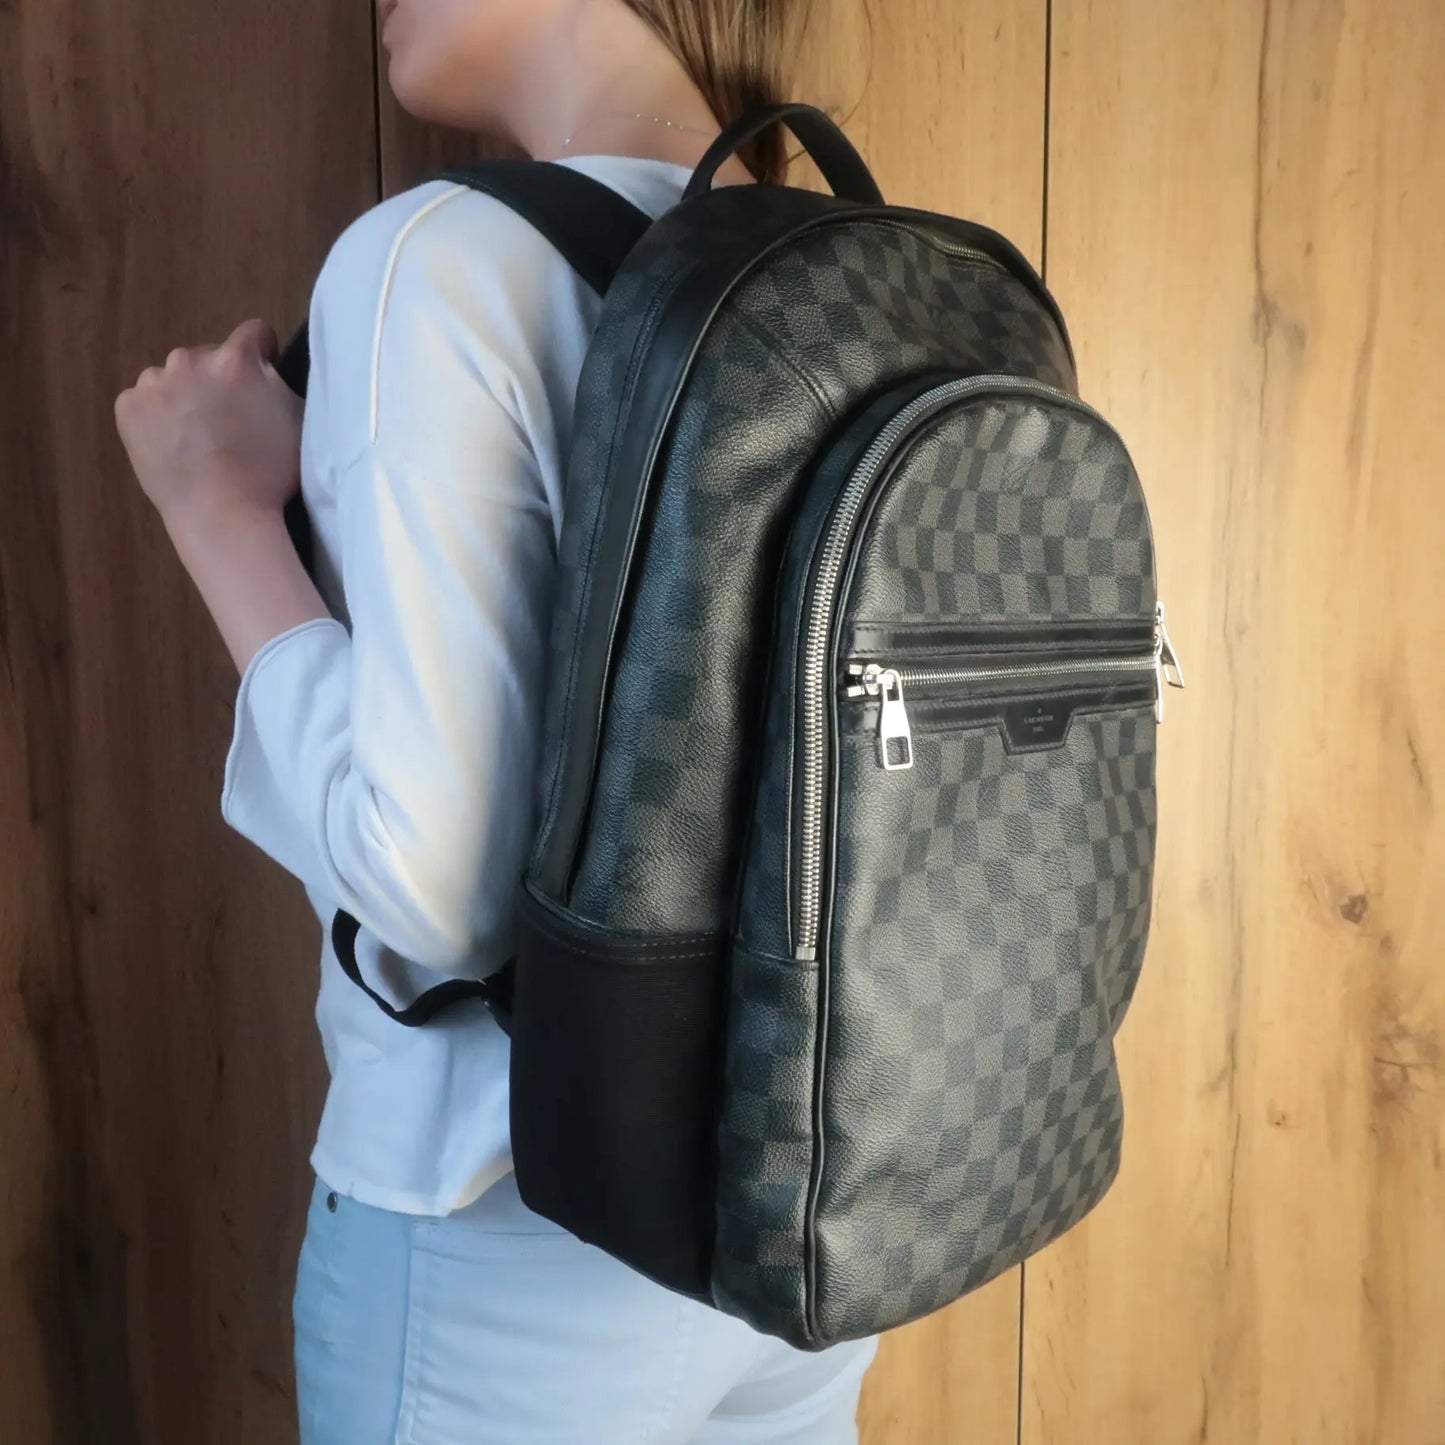 N40310 Louis Vuitton Damier Graphite Michael Backpack Unboxing Review   YouTube